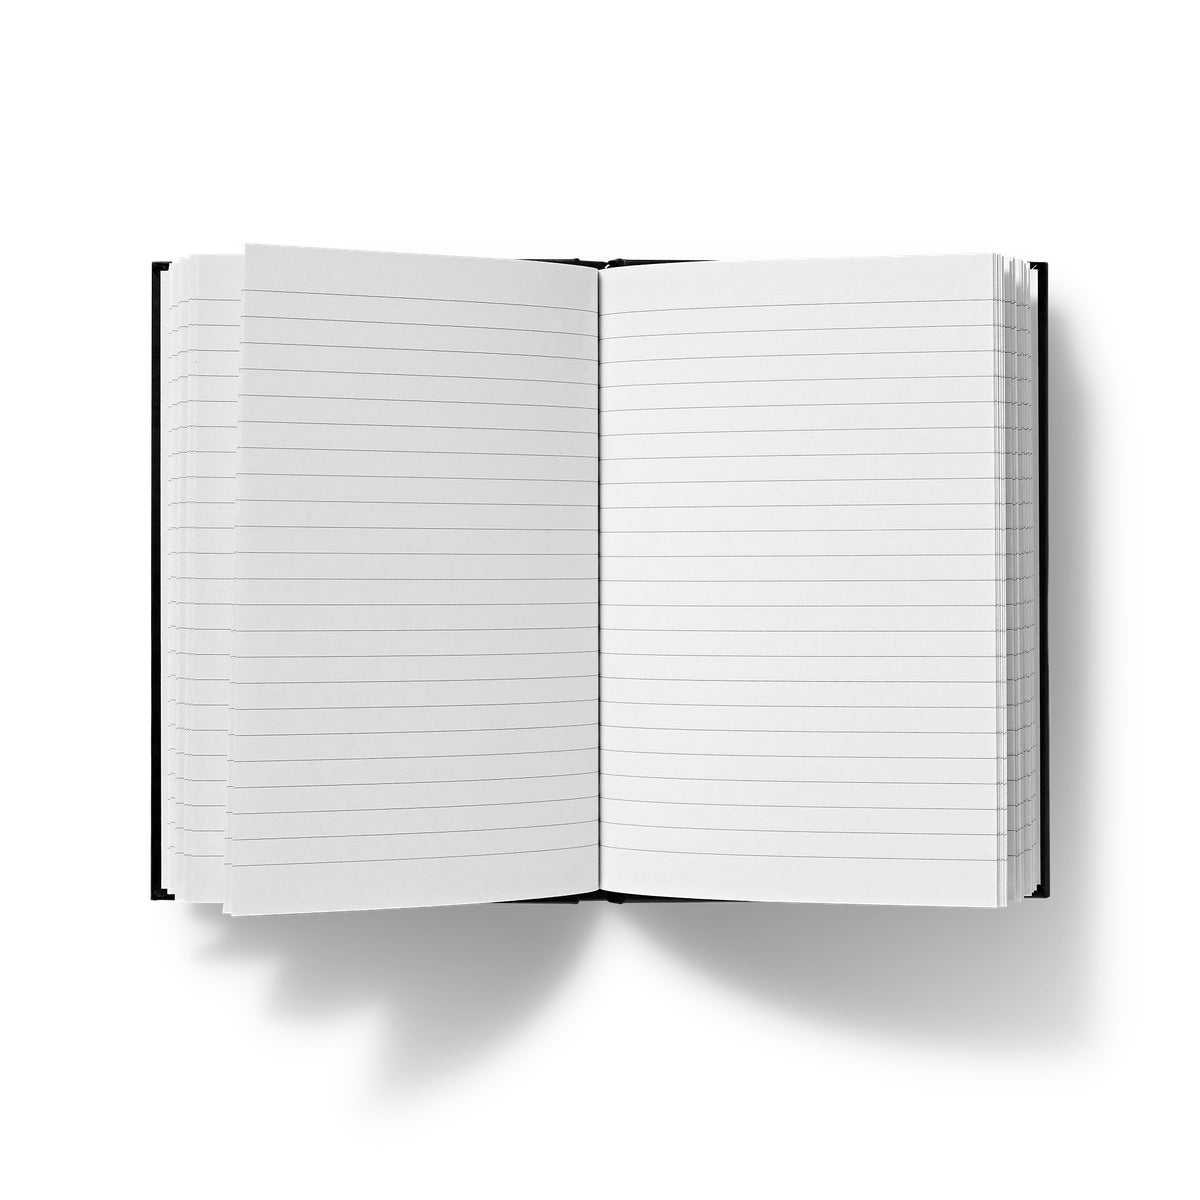 Hardback Notebook (101 to look busy on deck and avoid the Chief Mate)